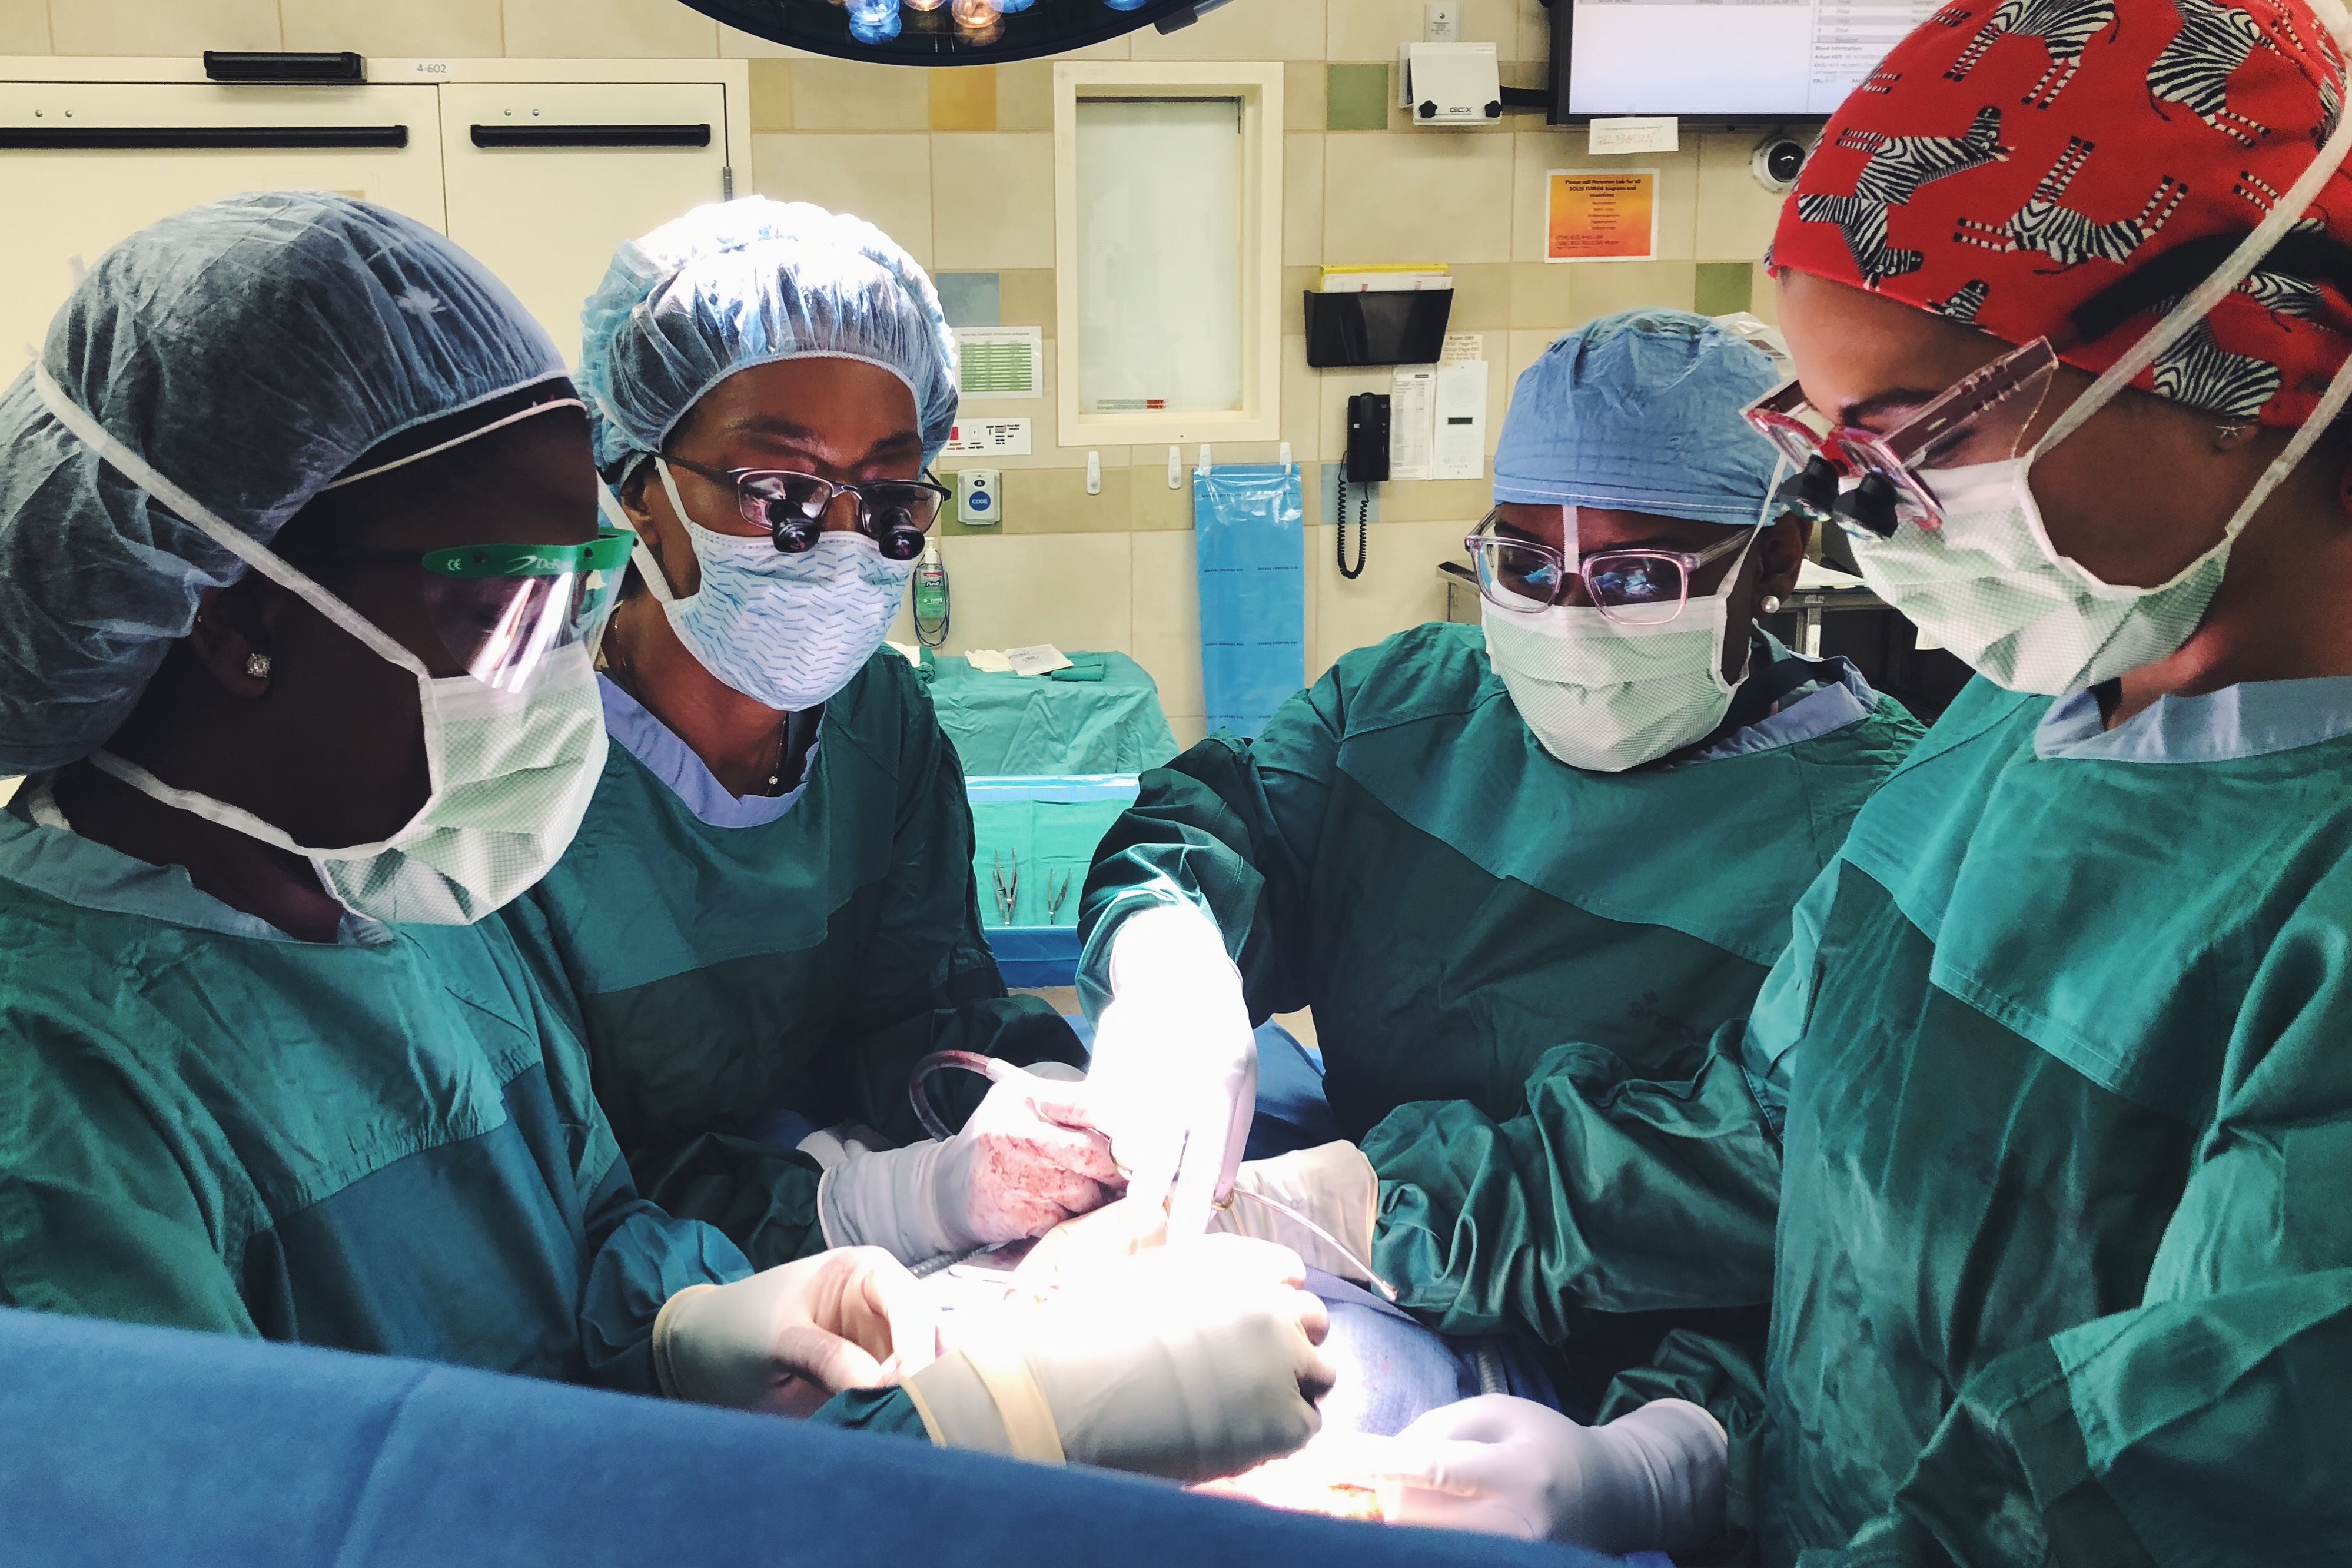 Christa Grant, Erika Newman, Shannon Fayson, and Valeria Valbuena in the operating room 